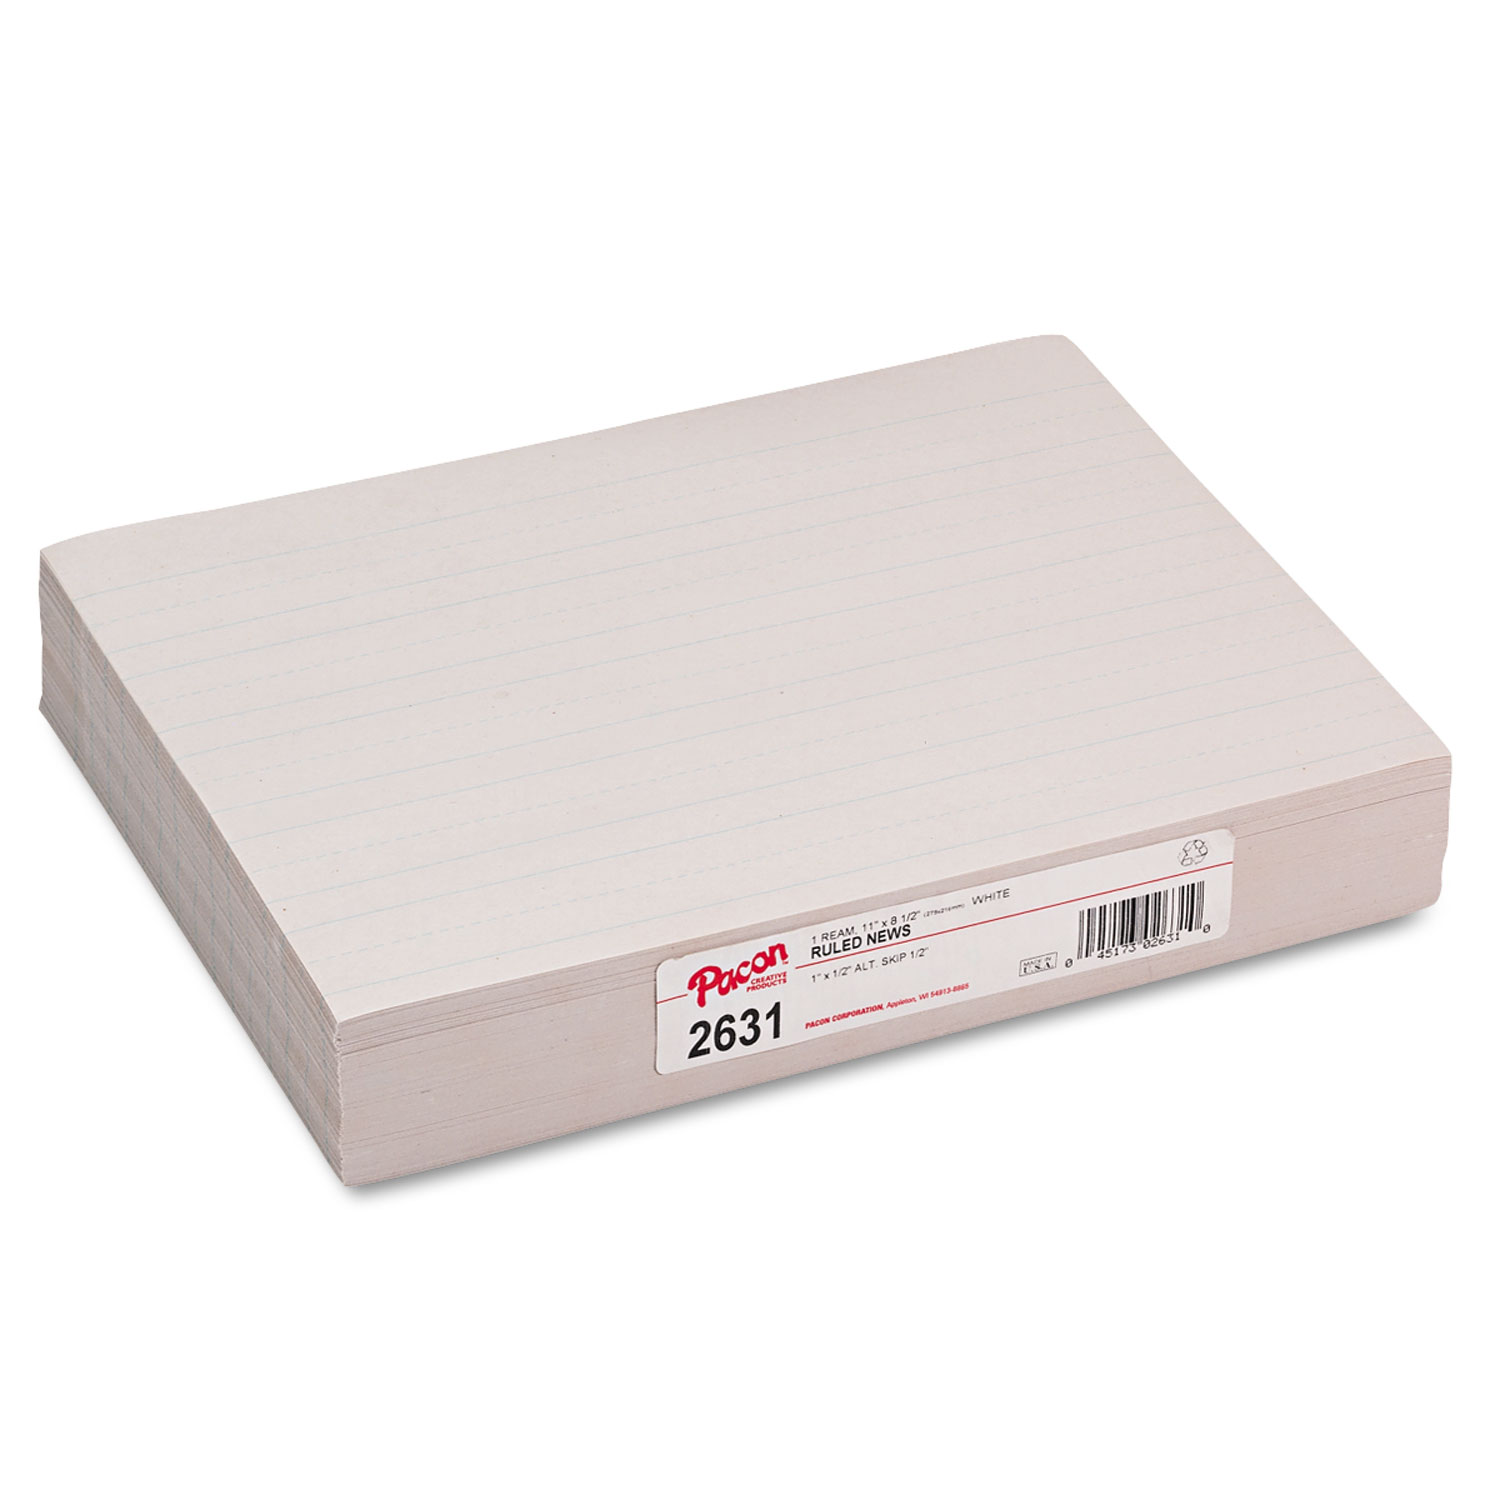  Pacon 2631 Skip-A-Line Ruled Newsprint Paper, 1 Two-Sided Long Rule, 8.5 x 11, 500/Pack (PAC2631) 